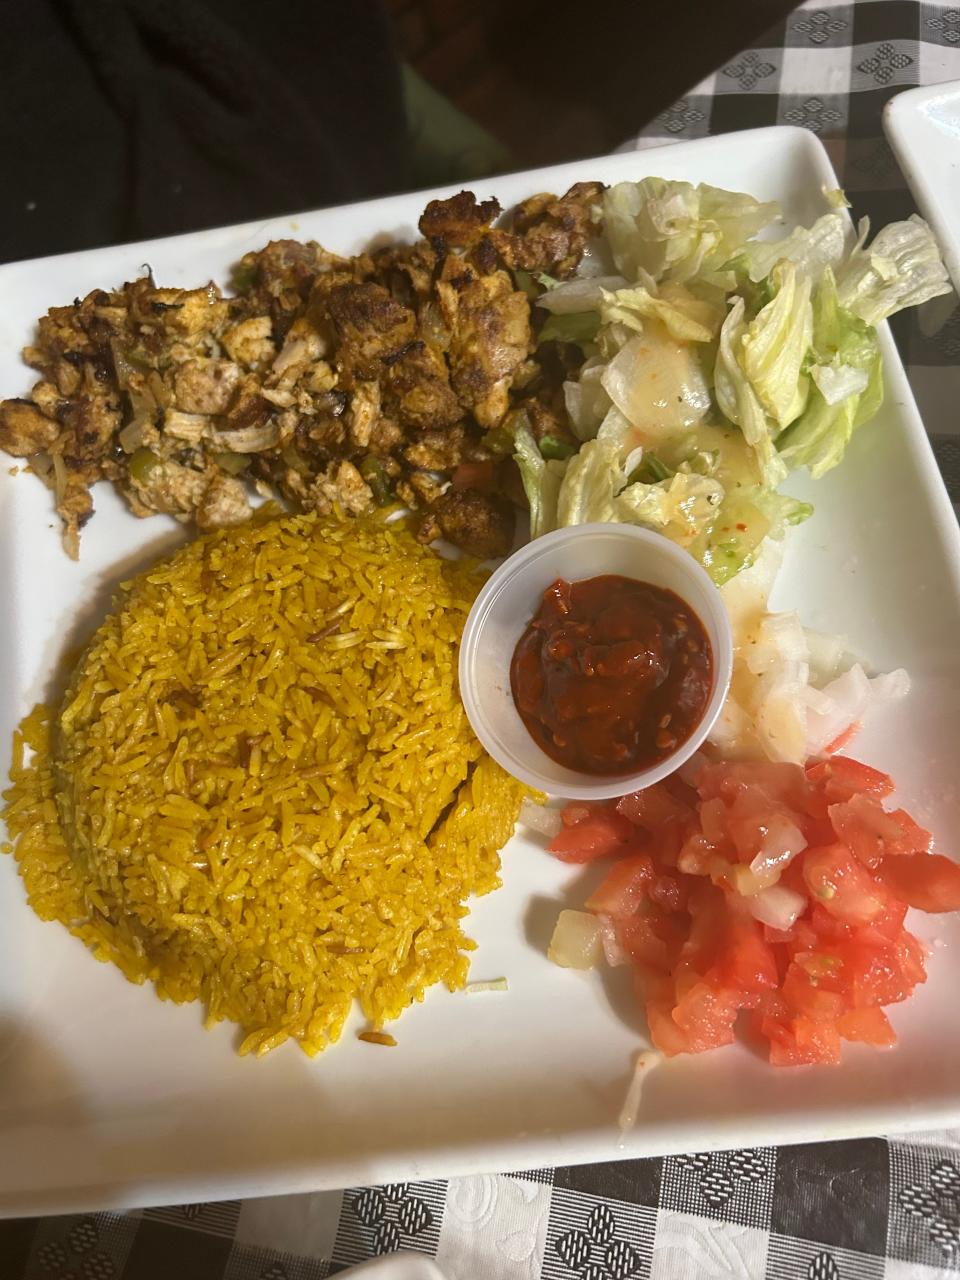 Chicken shawarma with rice at Mid-East Cafe and Resaurant.